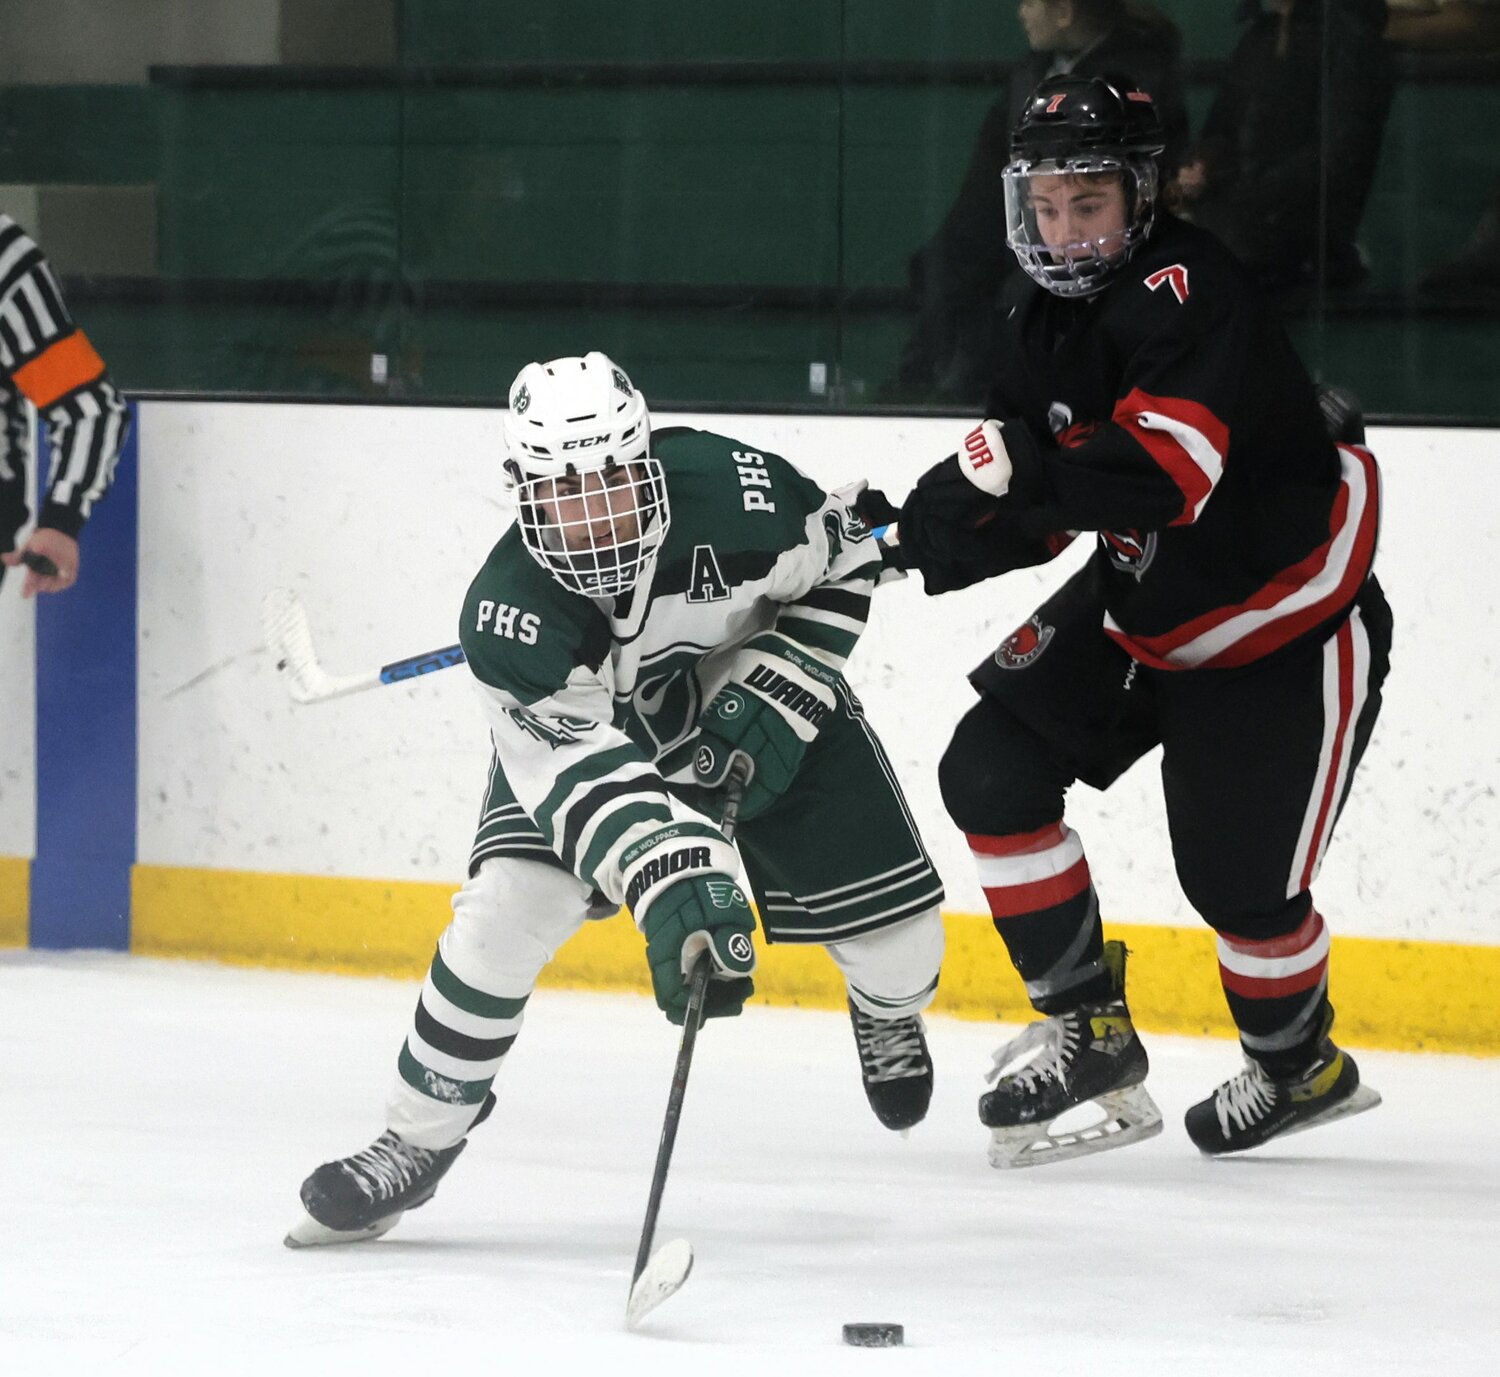 Gavin Moss of the Wolfpack moved the puck down the ice in the second period against Stillwater.